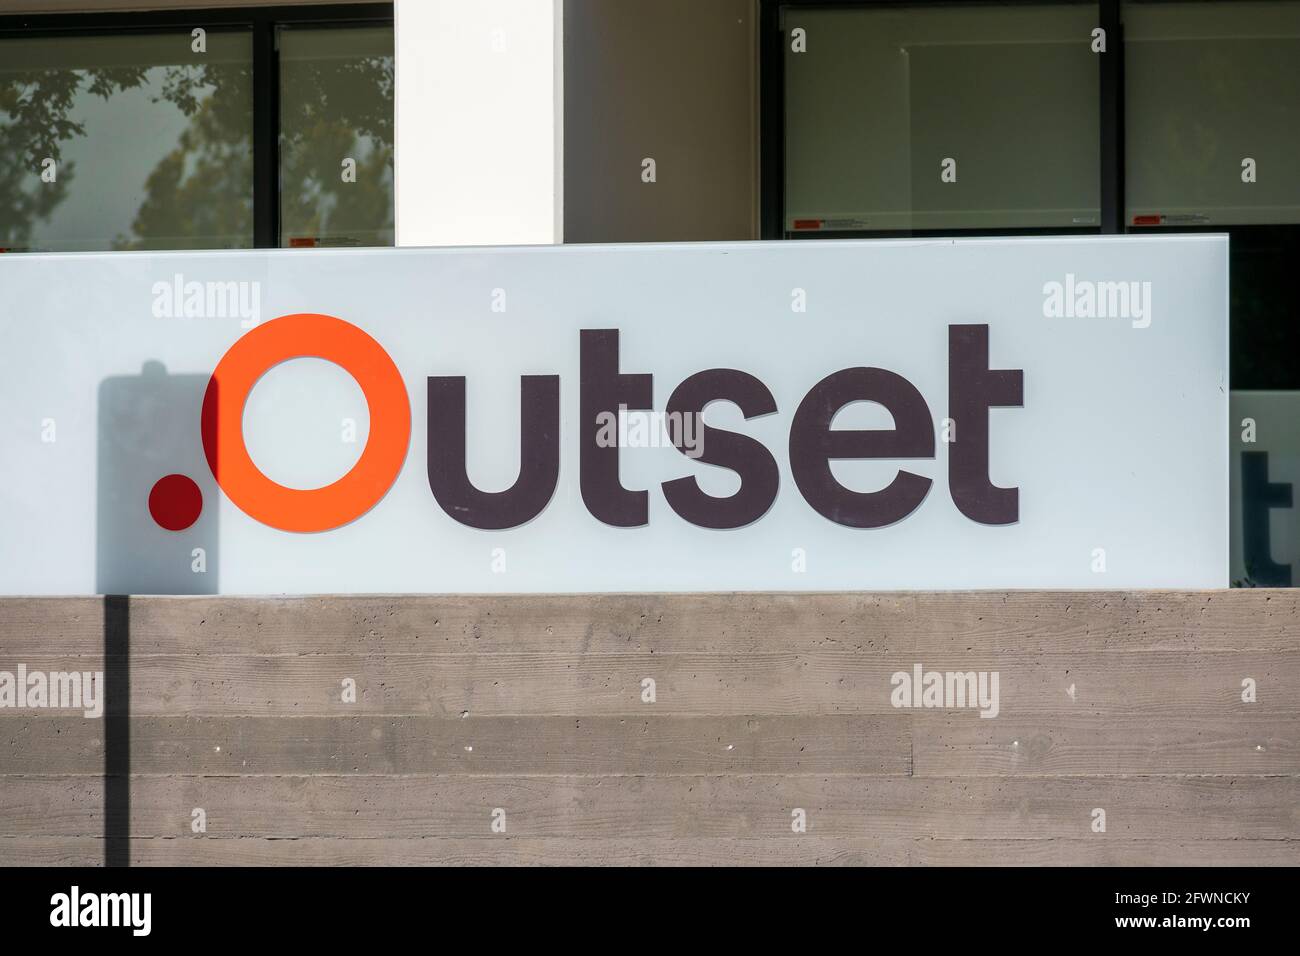 Outset sign logo on company headquarters. Outset Medical, Inc. develops a hemodialysis system for kidney patients - San Jose, California, USA - 2020 Stock Photo